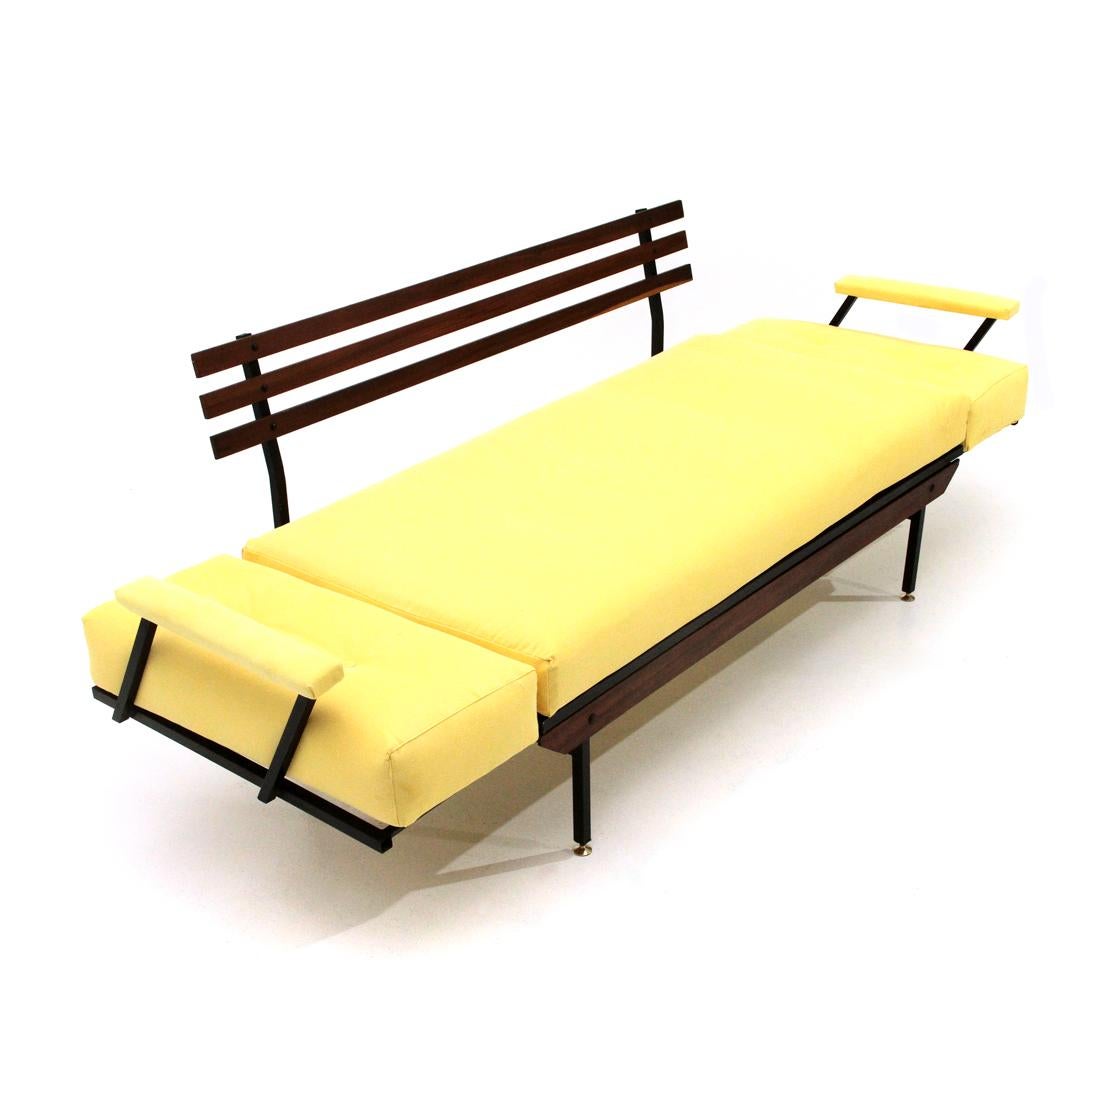 Metal Italian Midcentury Sofa Bed in Yellow Fabric, 1950s For Sale